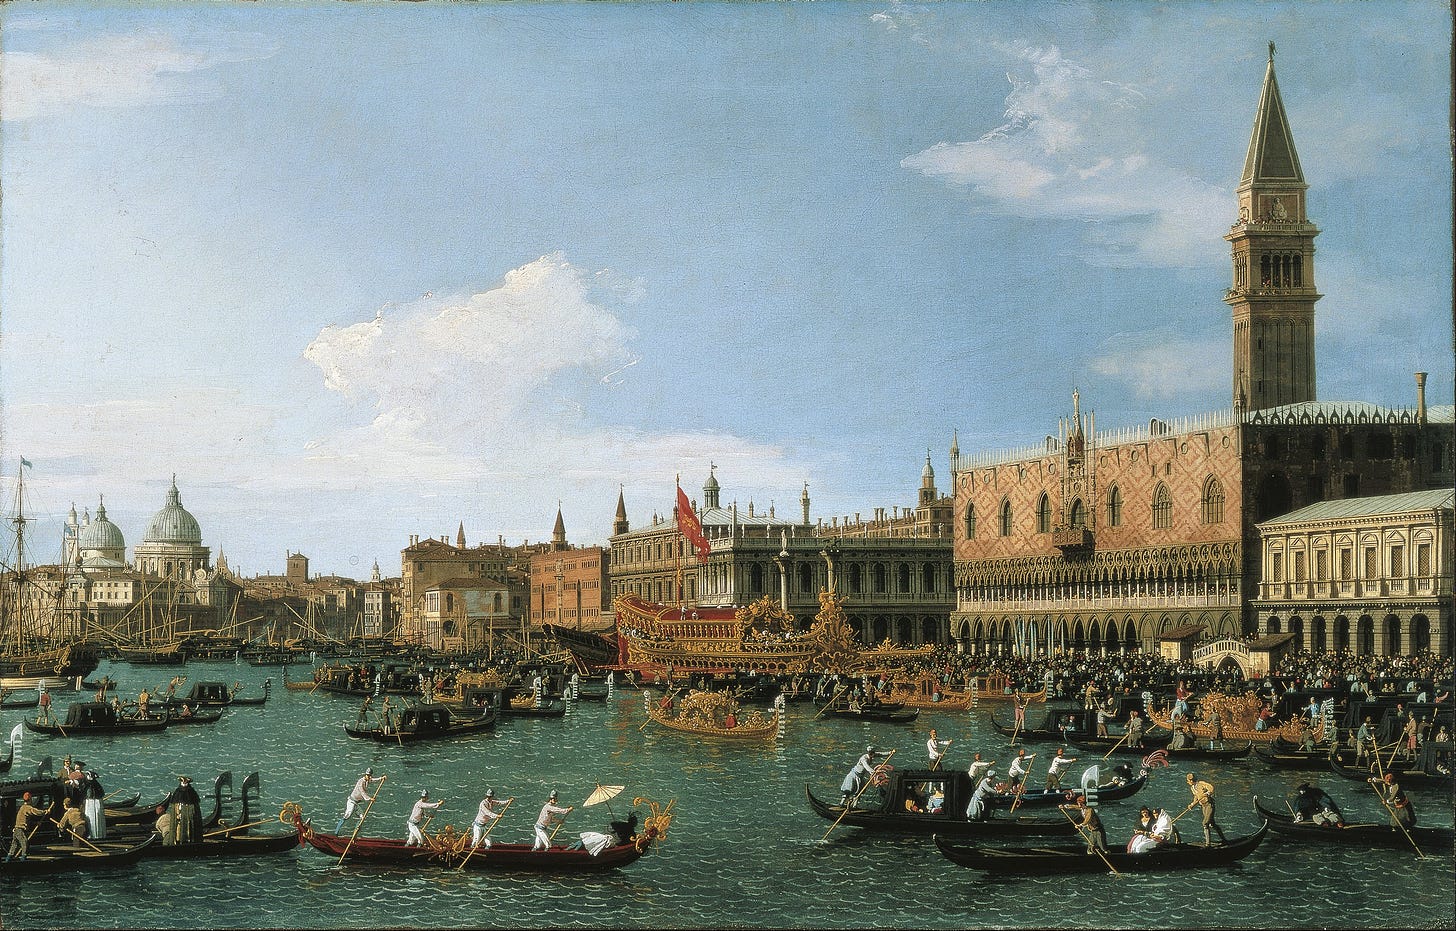 https://upload.wikimedia.org/wikipedia/commons/7/78/Canaletto_-_Return_of_%27Il_Bucintoro%27_on_Ascension_Day_-_Google_Art_Project.jpg